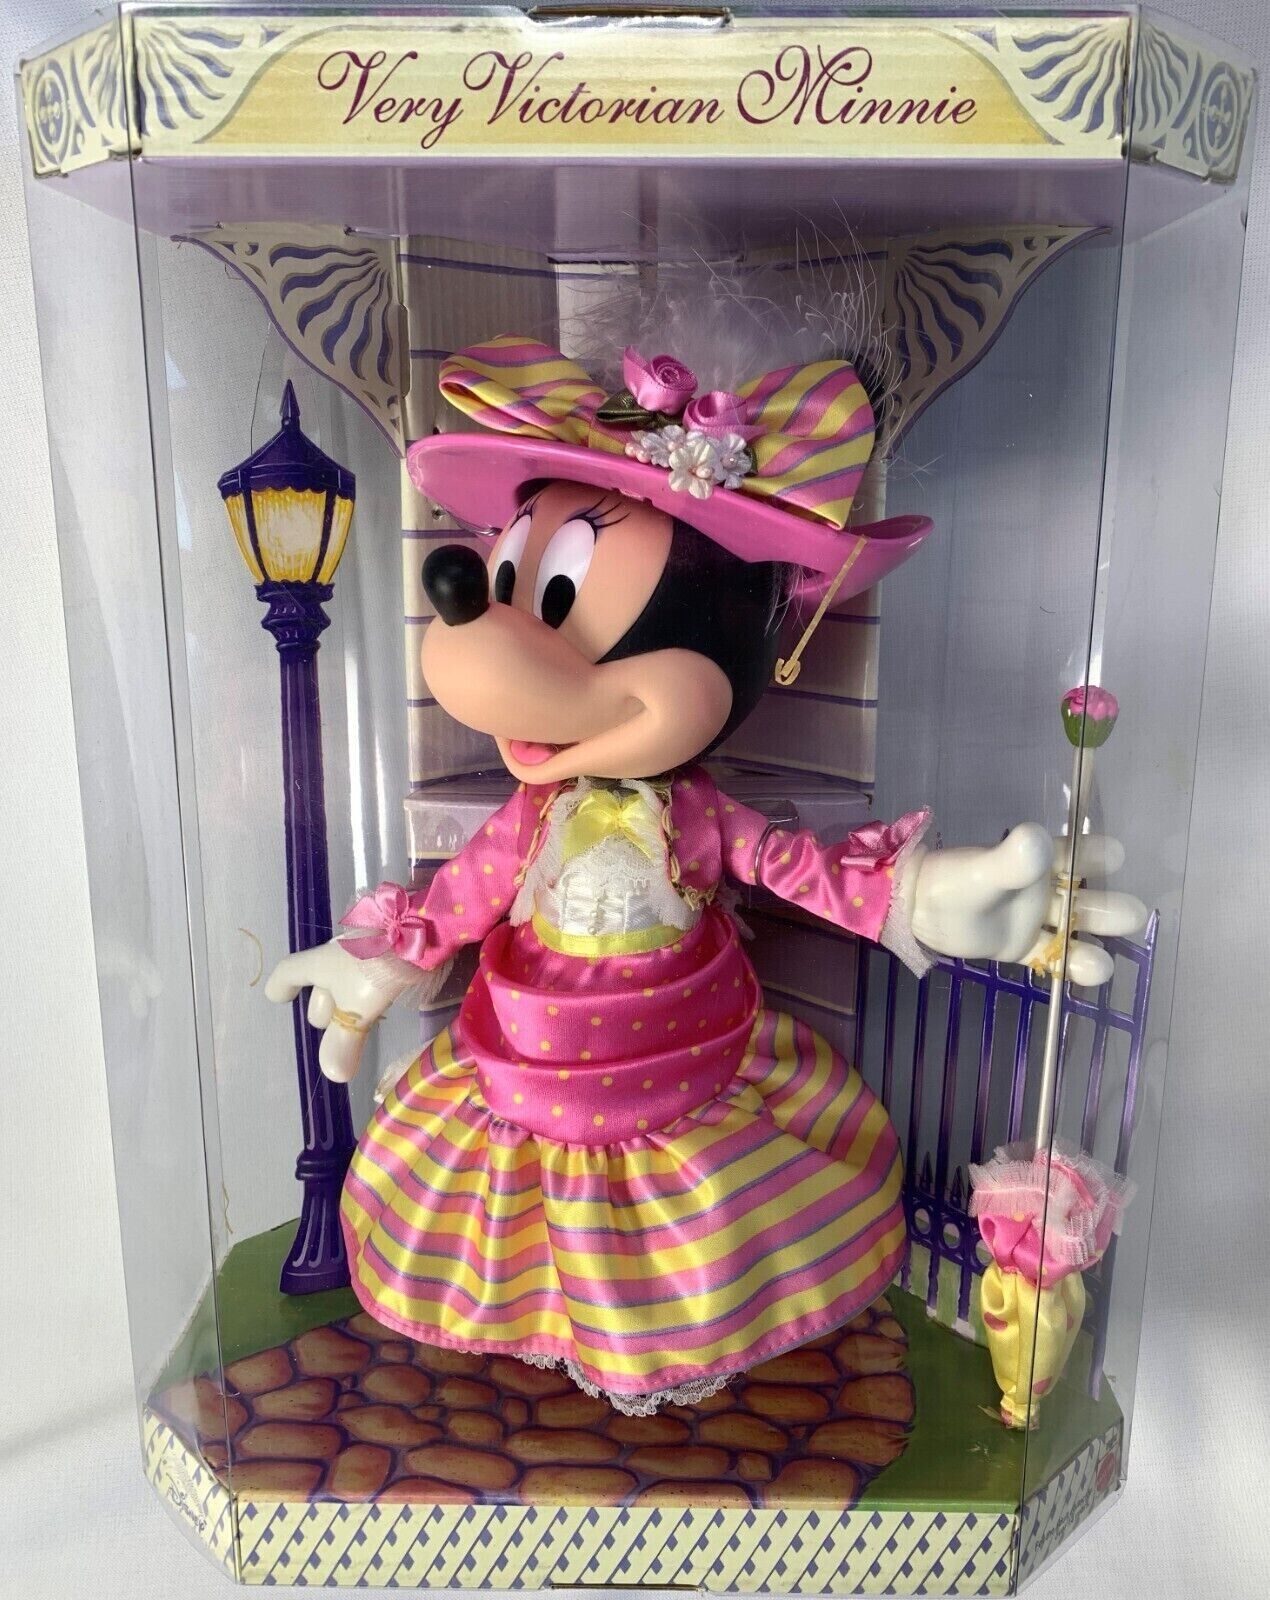 NEW 2000 Mattel Disney Very Victorian Minnie Mouse Doll Boxed FREESHIP